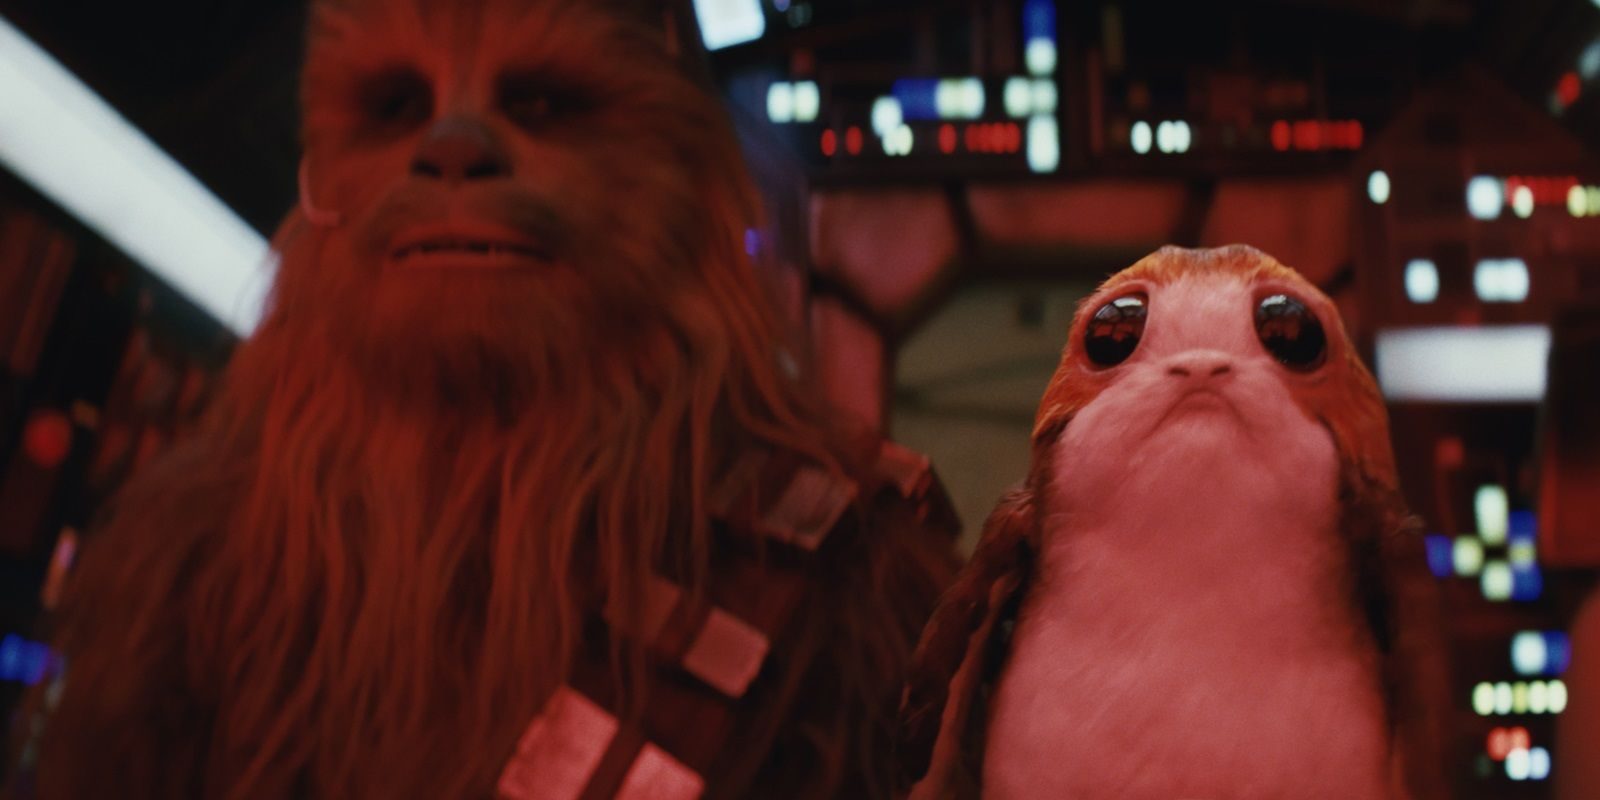 chewbacca-and-a-porg-on-the-milennium-facon-in-star-wars-the-axir-jedi-5094236